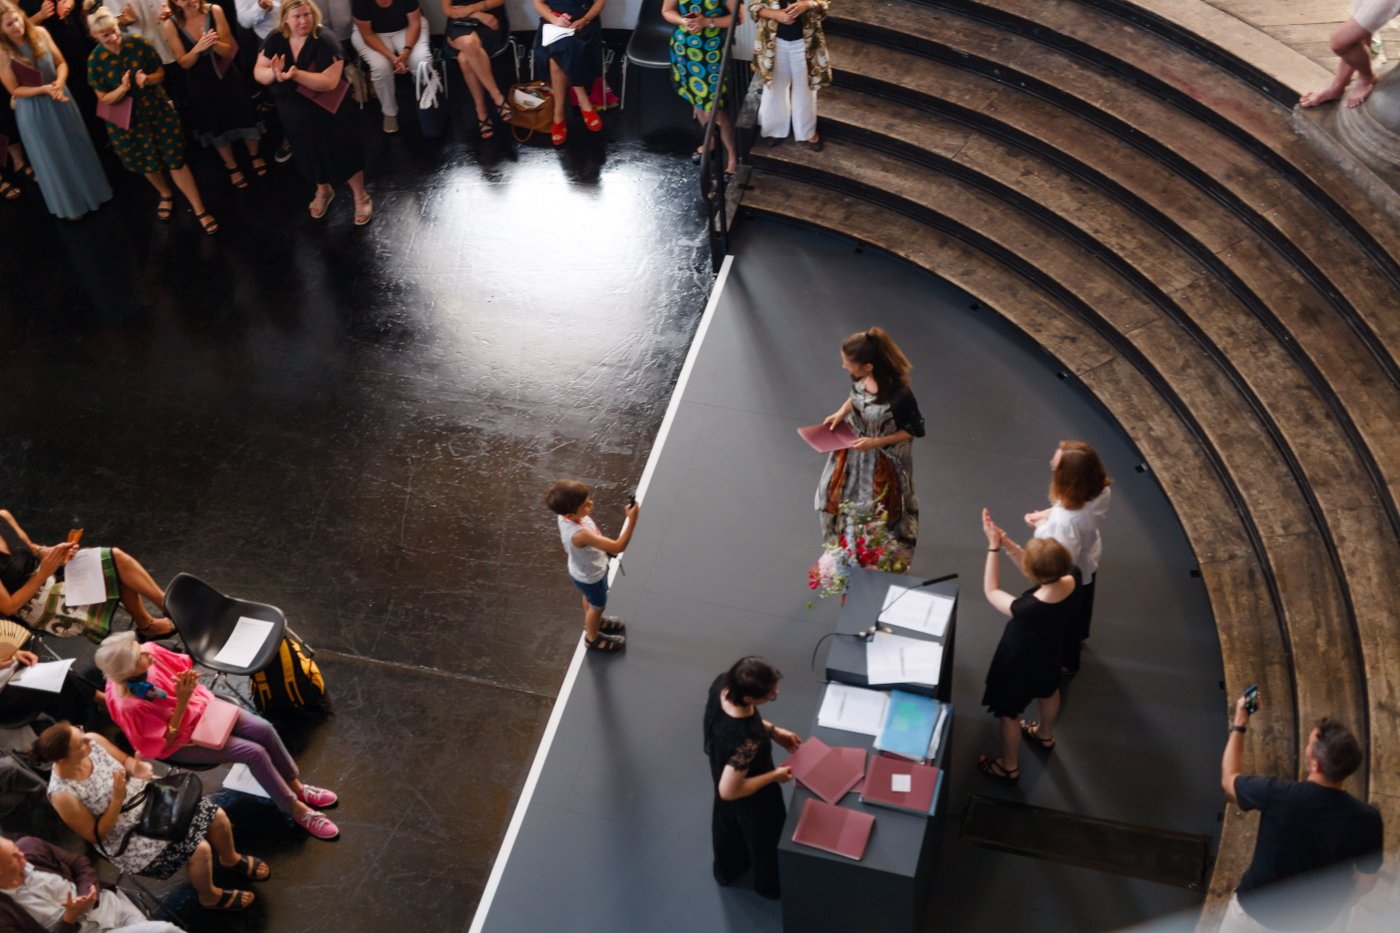 Presentation of certificates during the graduation ceremony 2019 in the Prospekthof: On stage, a graduand has a red folder in her hand, a little boy takes her picture, three other people applaud. The scene is seen from above, the people are standing on a kind of round stage surrounded by wooden stairs.